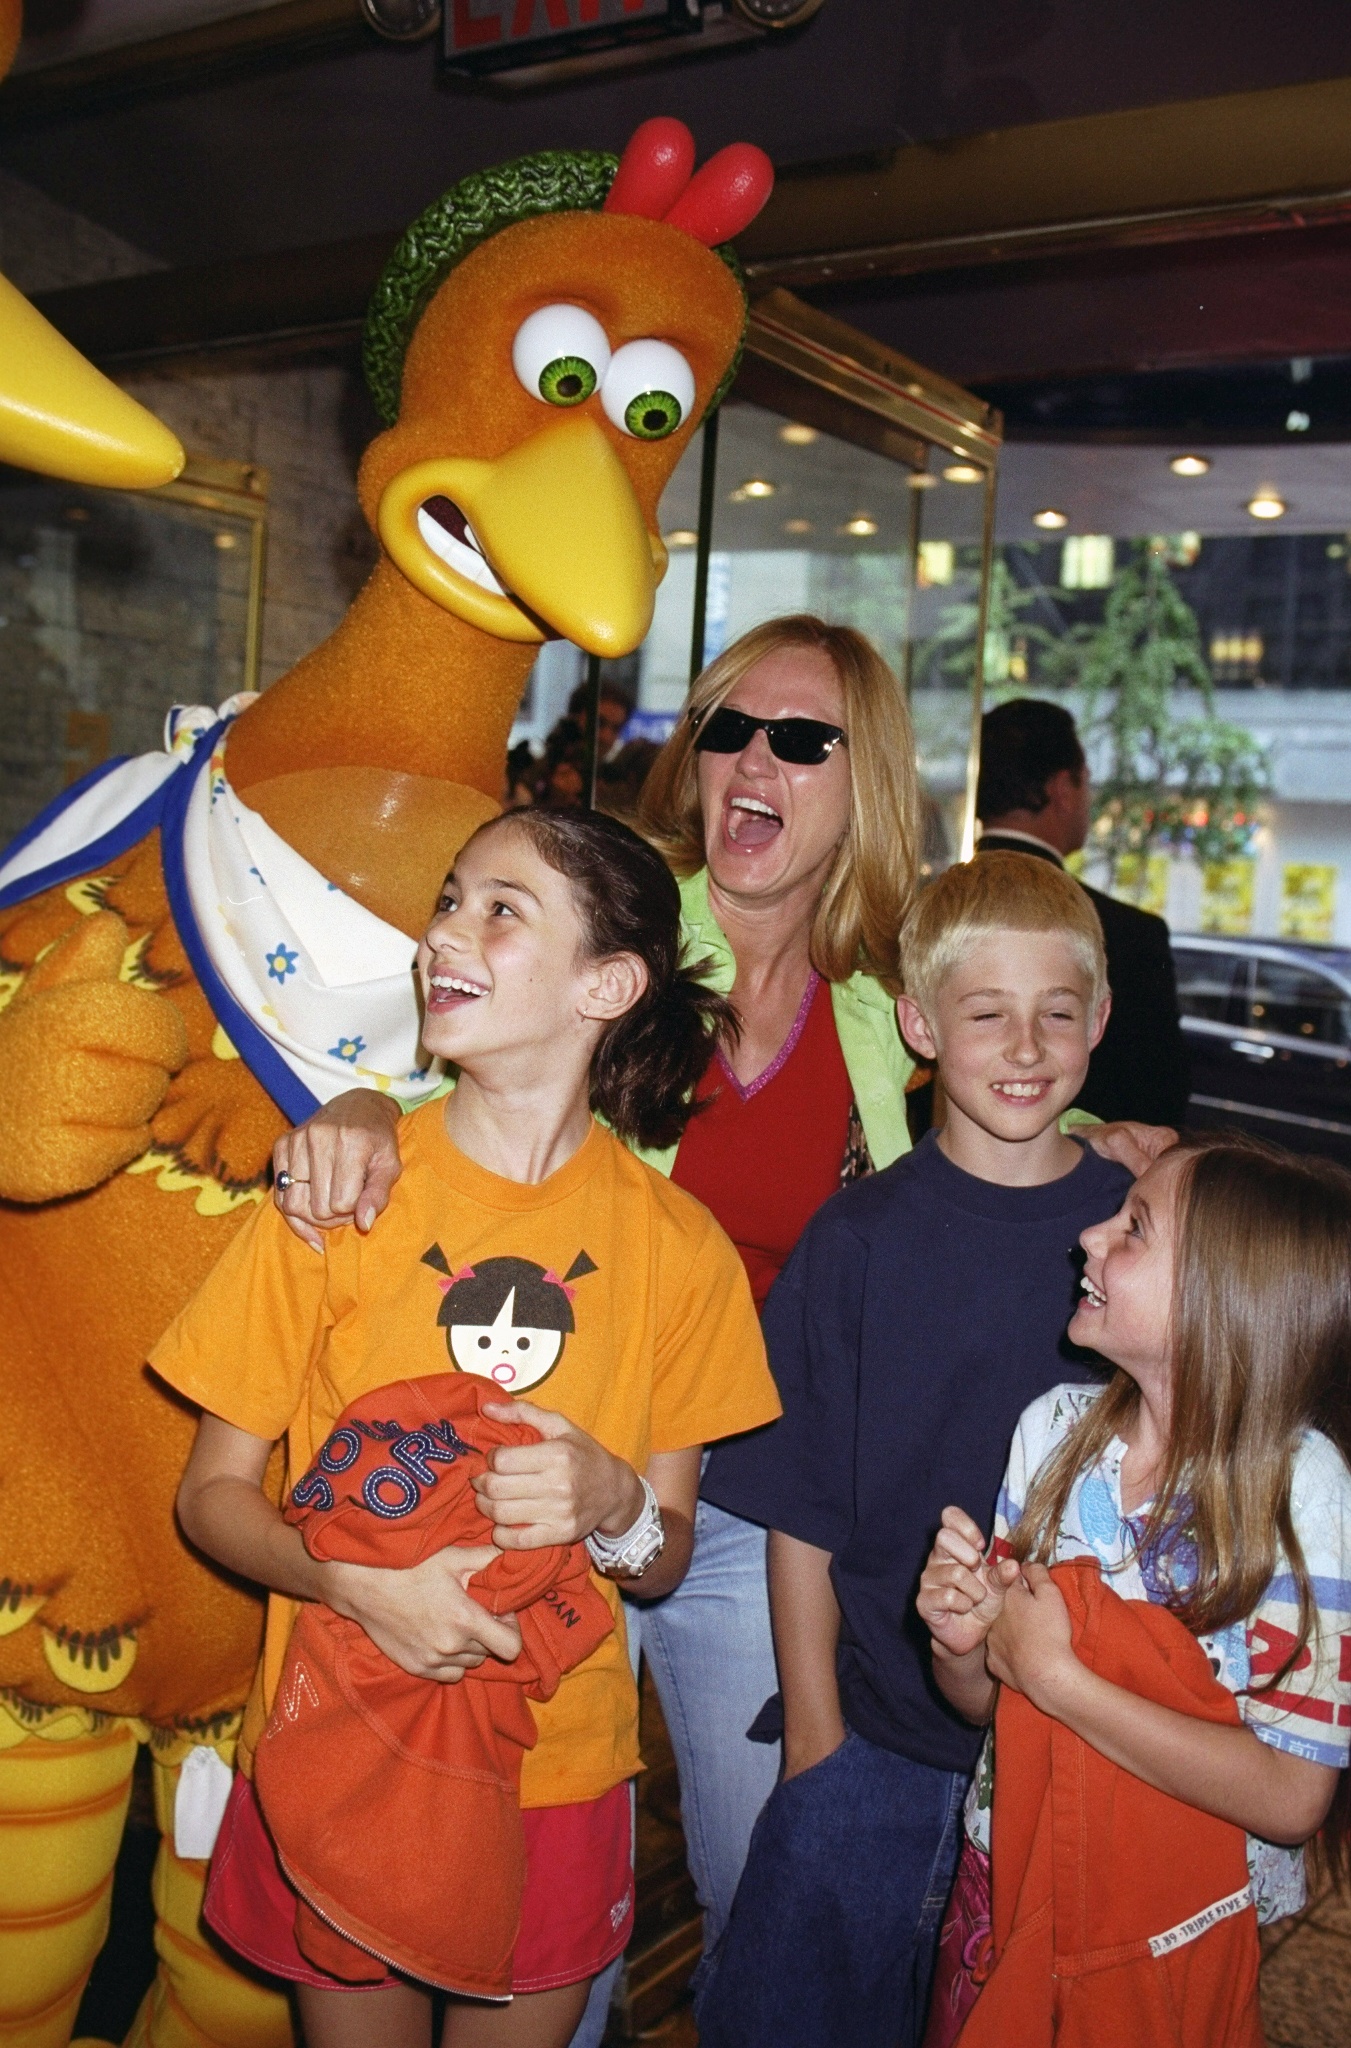 Actress Ellen Barkin arrives with her children, Jack and Romy Byrne (R), and her niece, Larna Barkin, for the New York premiere of the movie "Chicken Run" at the Sutton Theater on June 20, 2000 | Source: Getty Images